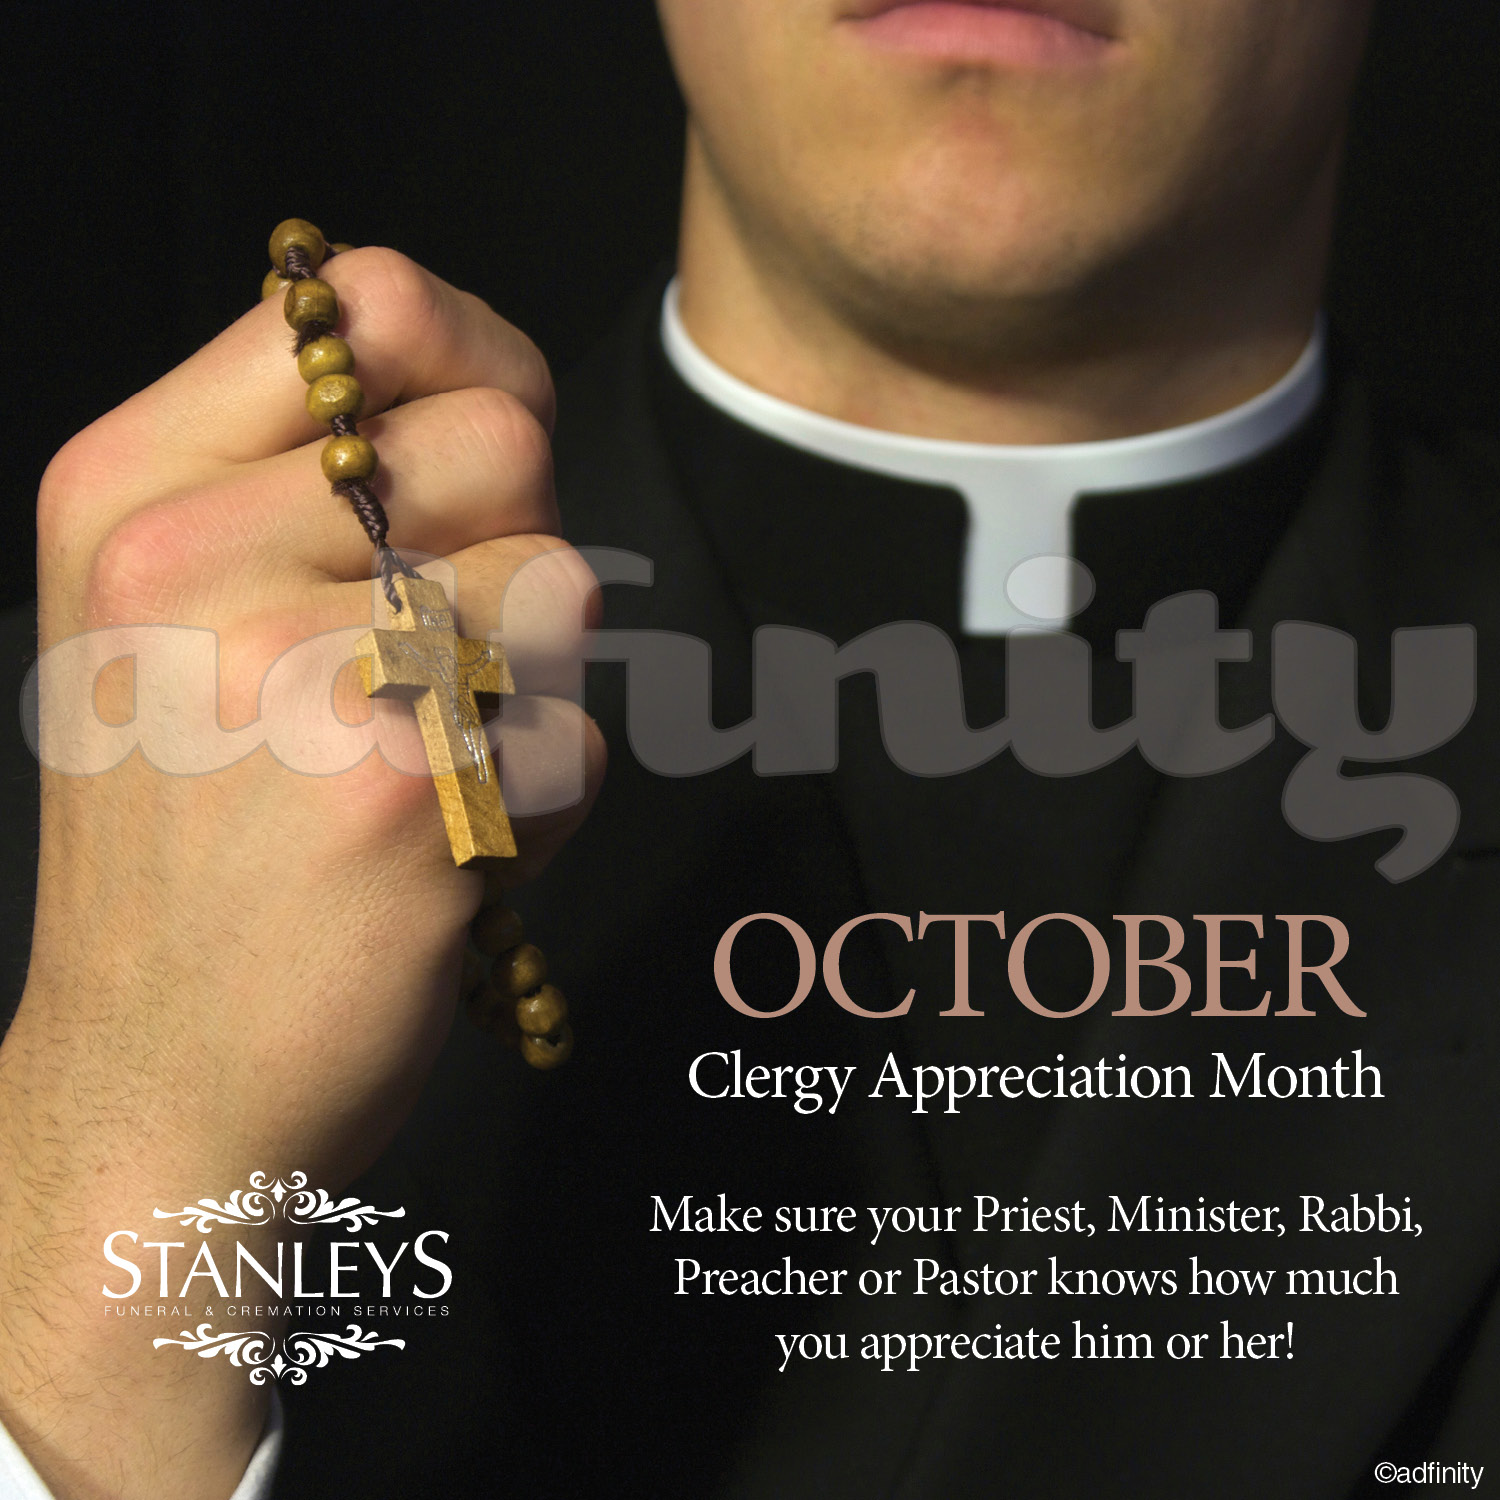 October is Clergy Appreciation Month. adfinity